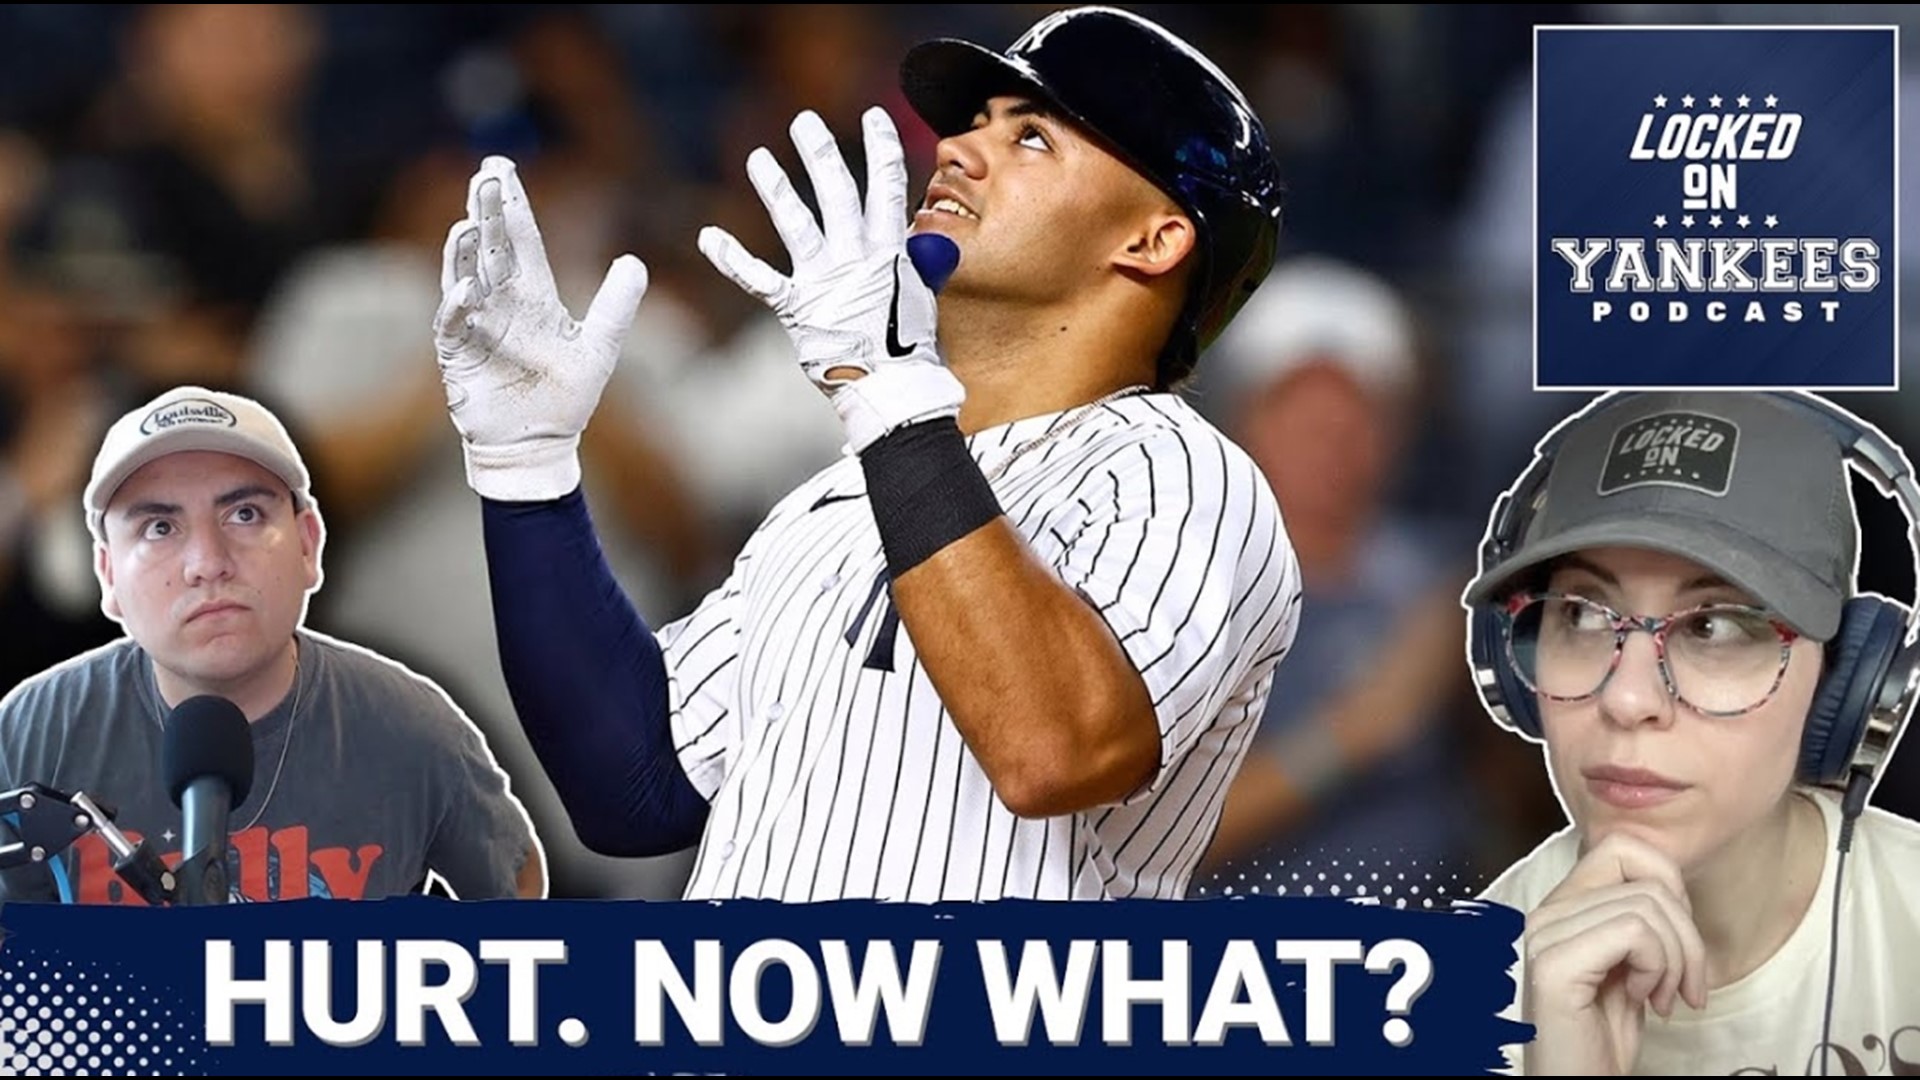 We talk about the Jasson Dominguez injury and what it means for the Yankees during the offseason and into the 2024 season.